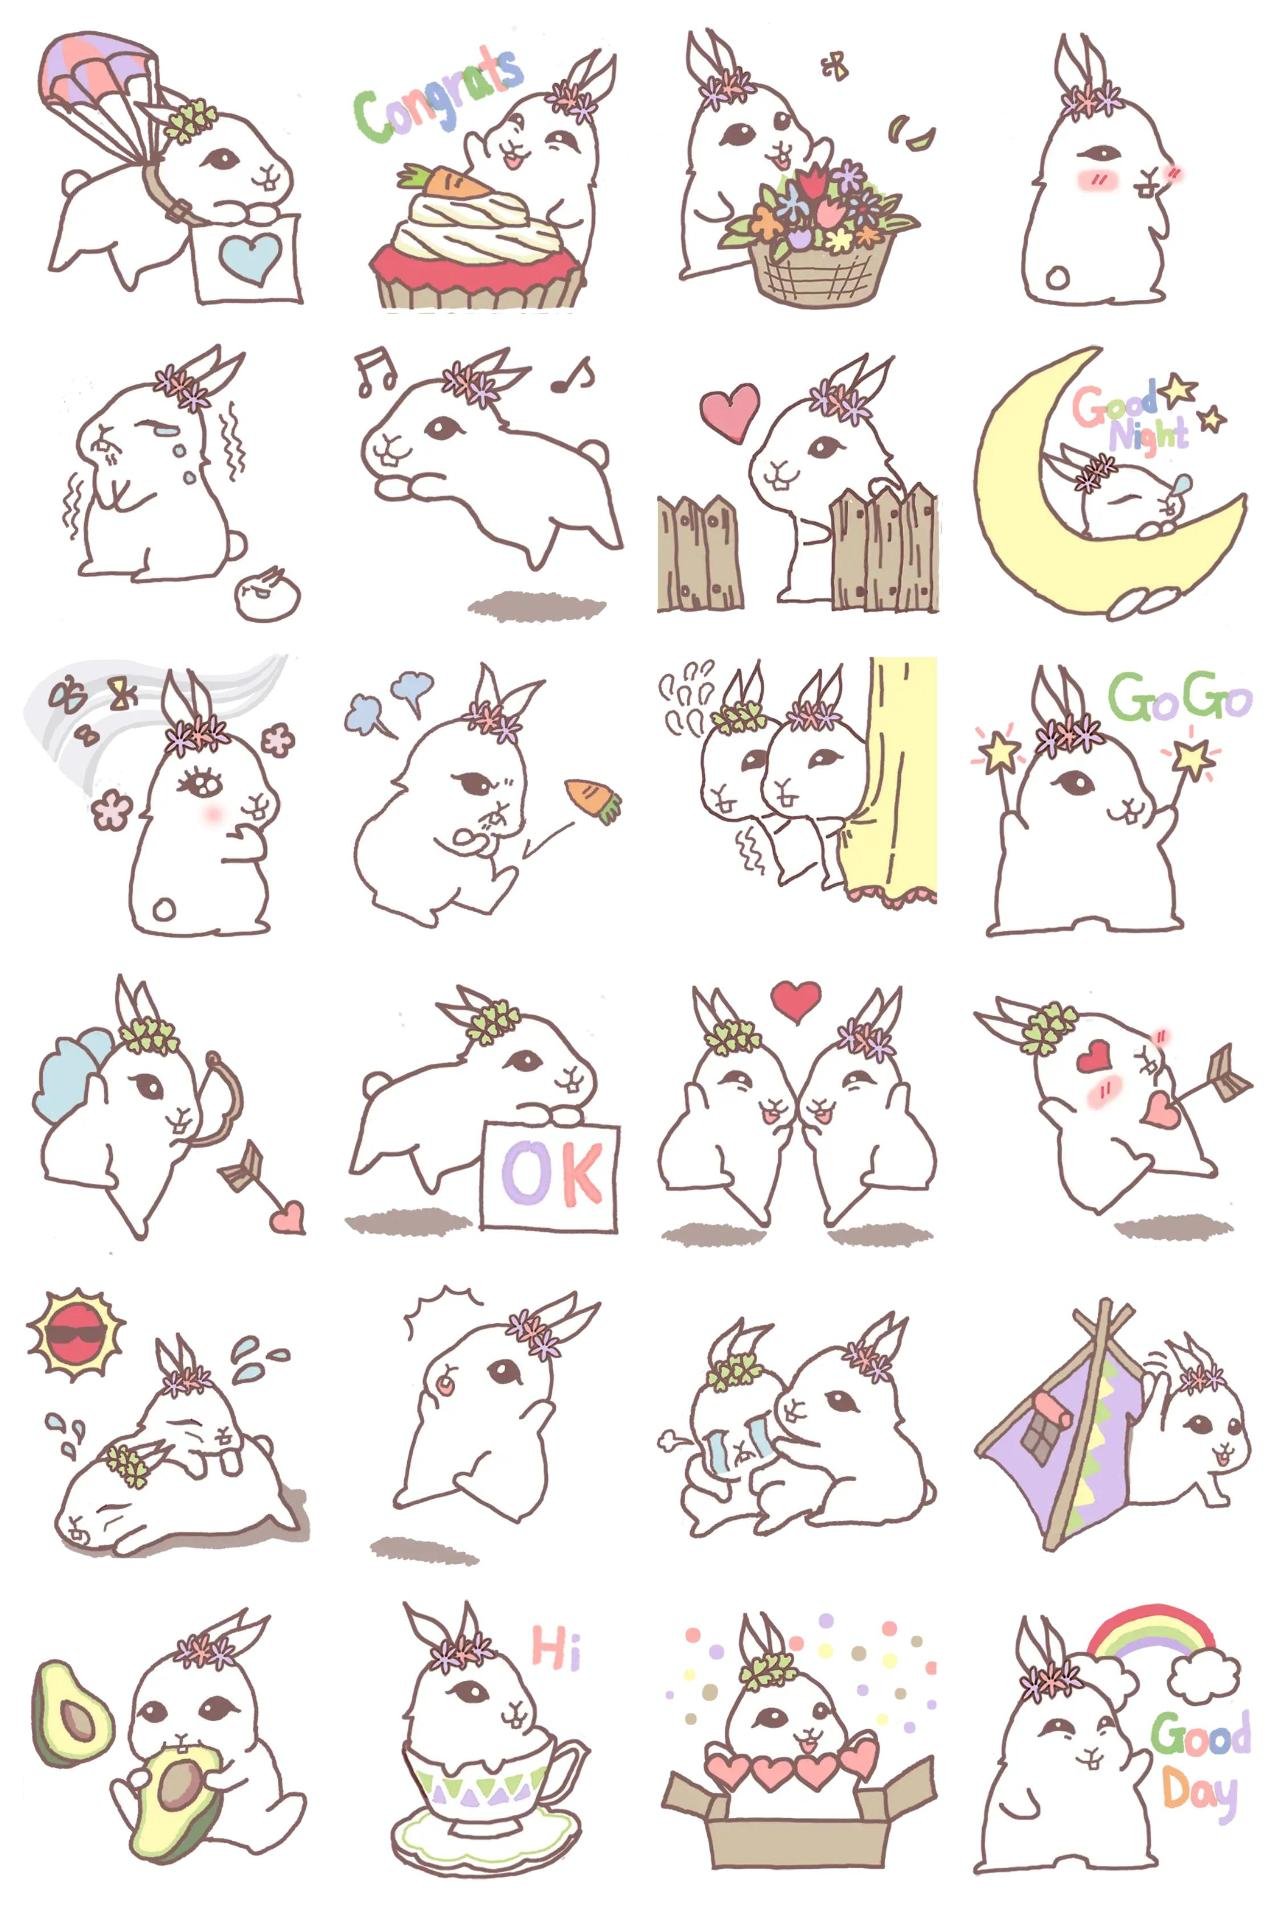 Flower Bunny & Clover Bunny Animation/Cartoon,Romance sticker pack for Whatsapp, Telegram, Signal, and others chatting and message apps